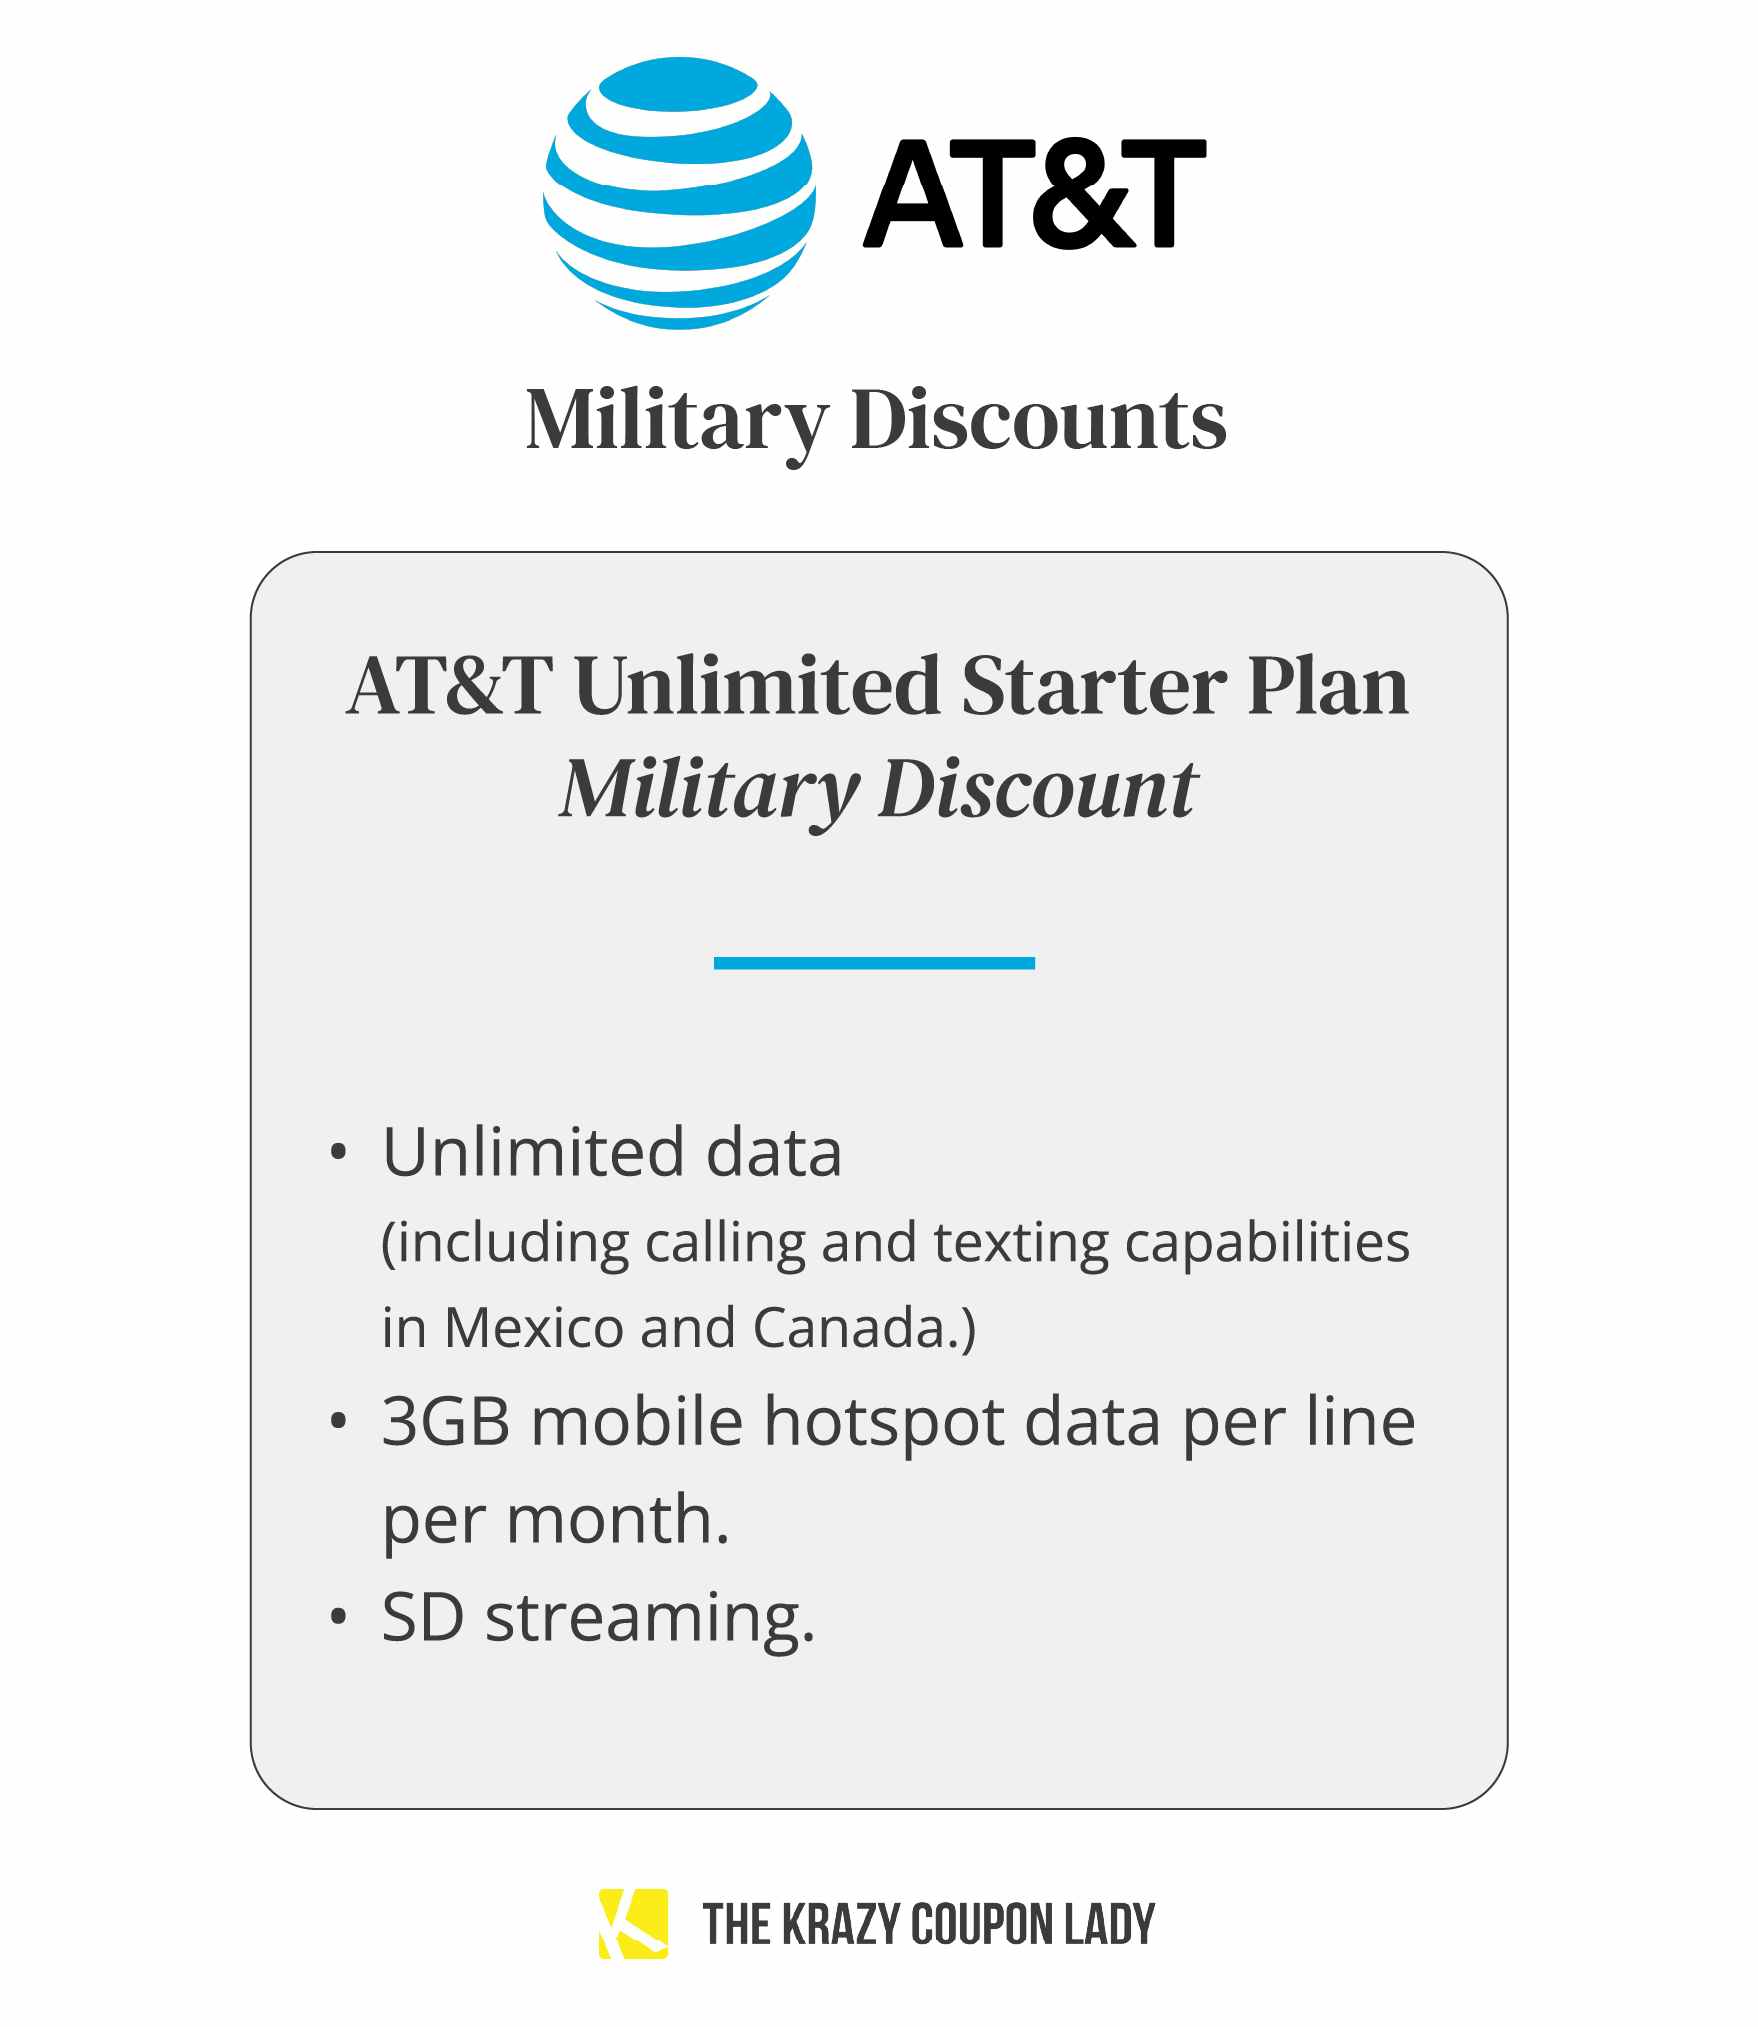 at&t military discounts unlimited starter plan graphic